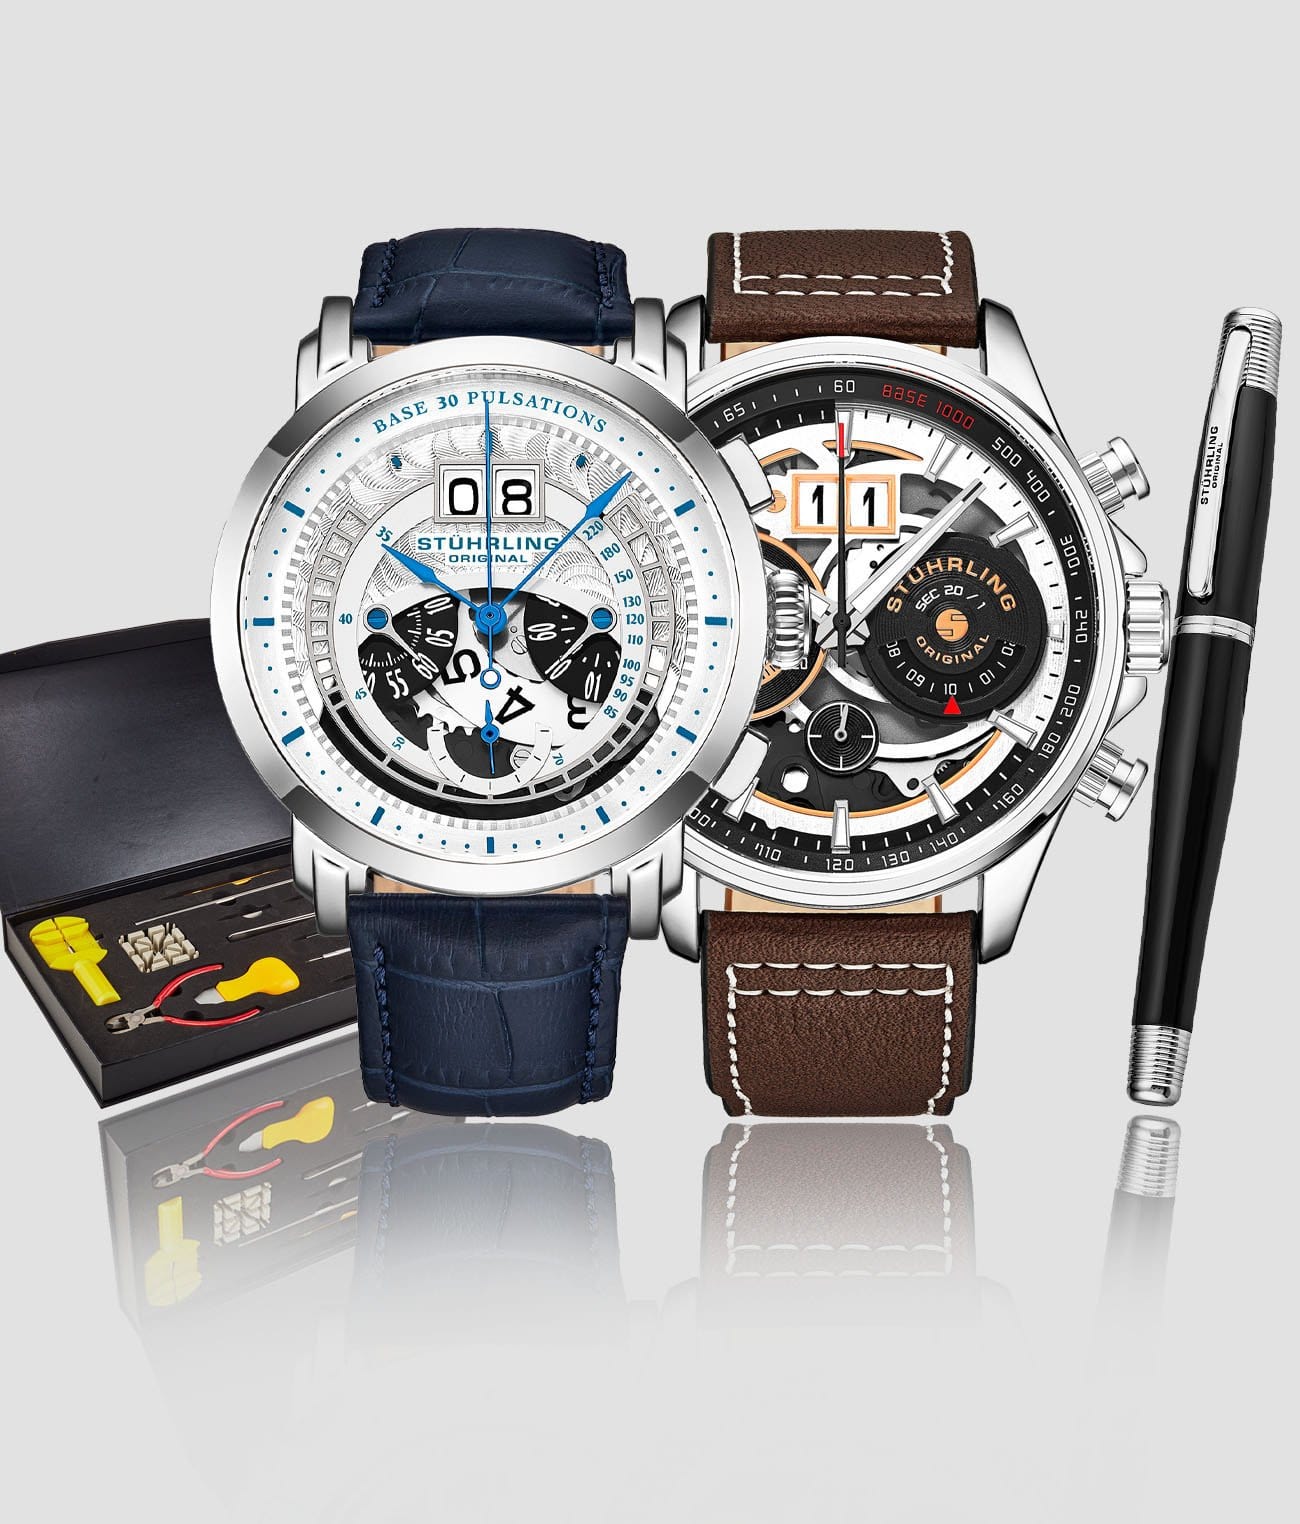 Imperia 928.01, Tachymeter 923.01, Signature Pen, and Watch Tool Kit